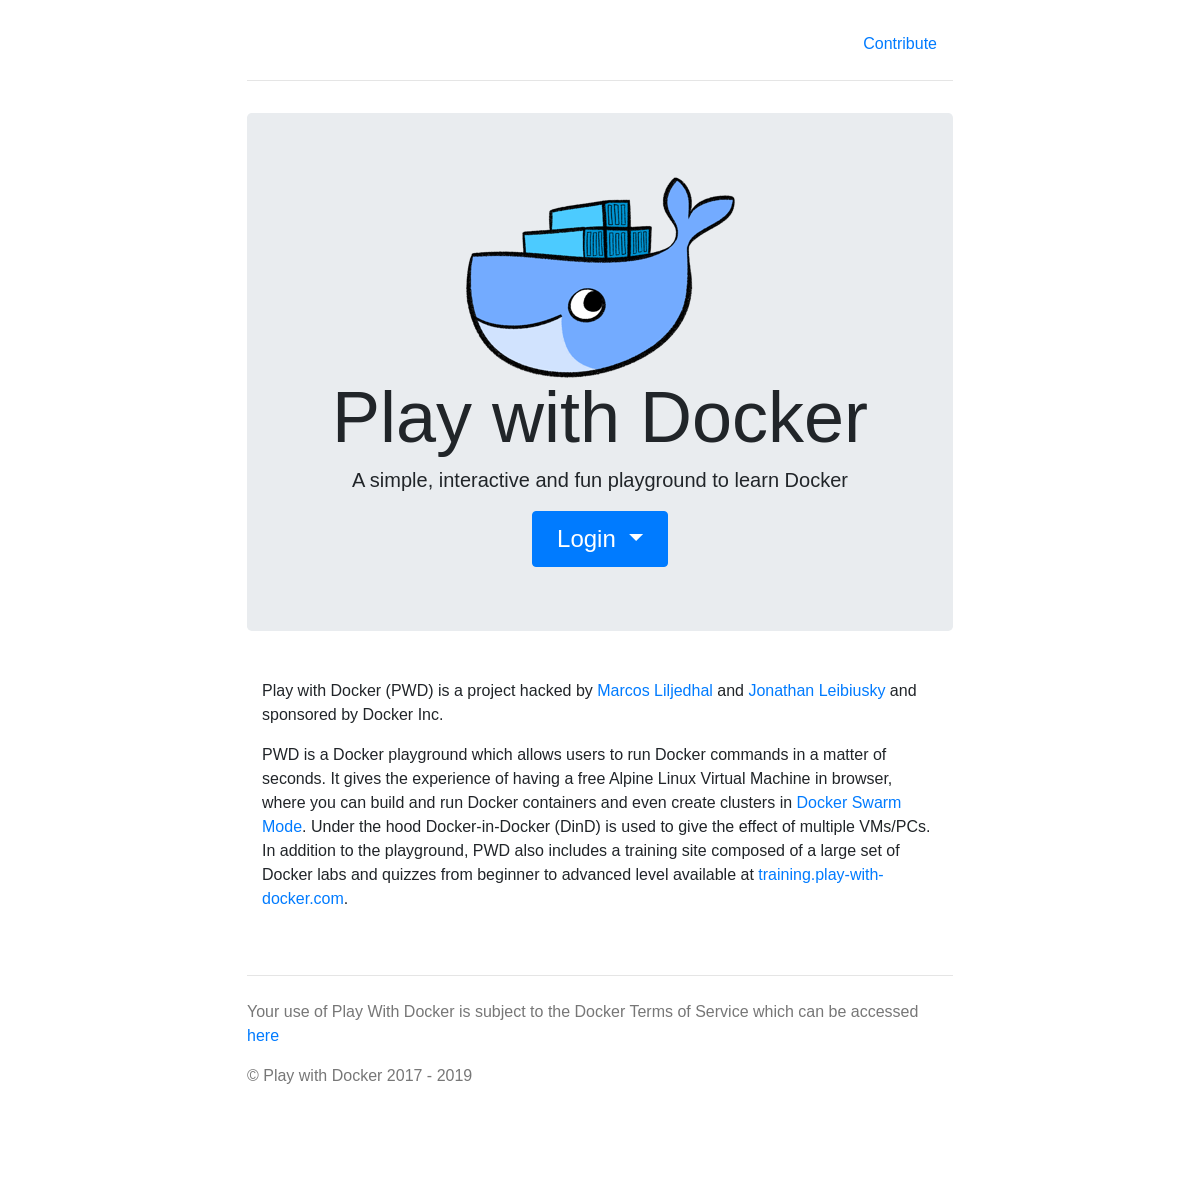 A complete backup of play-with-docker.com